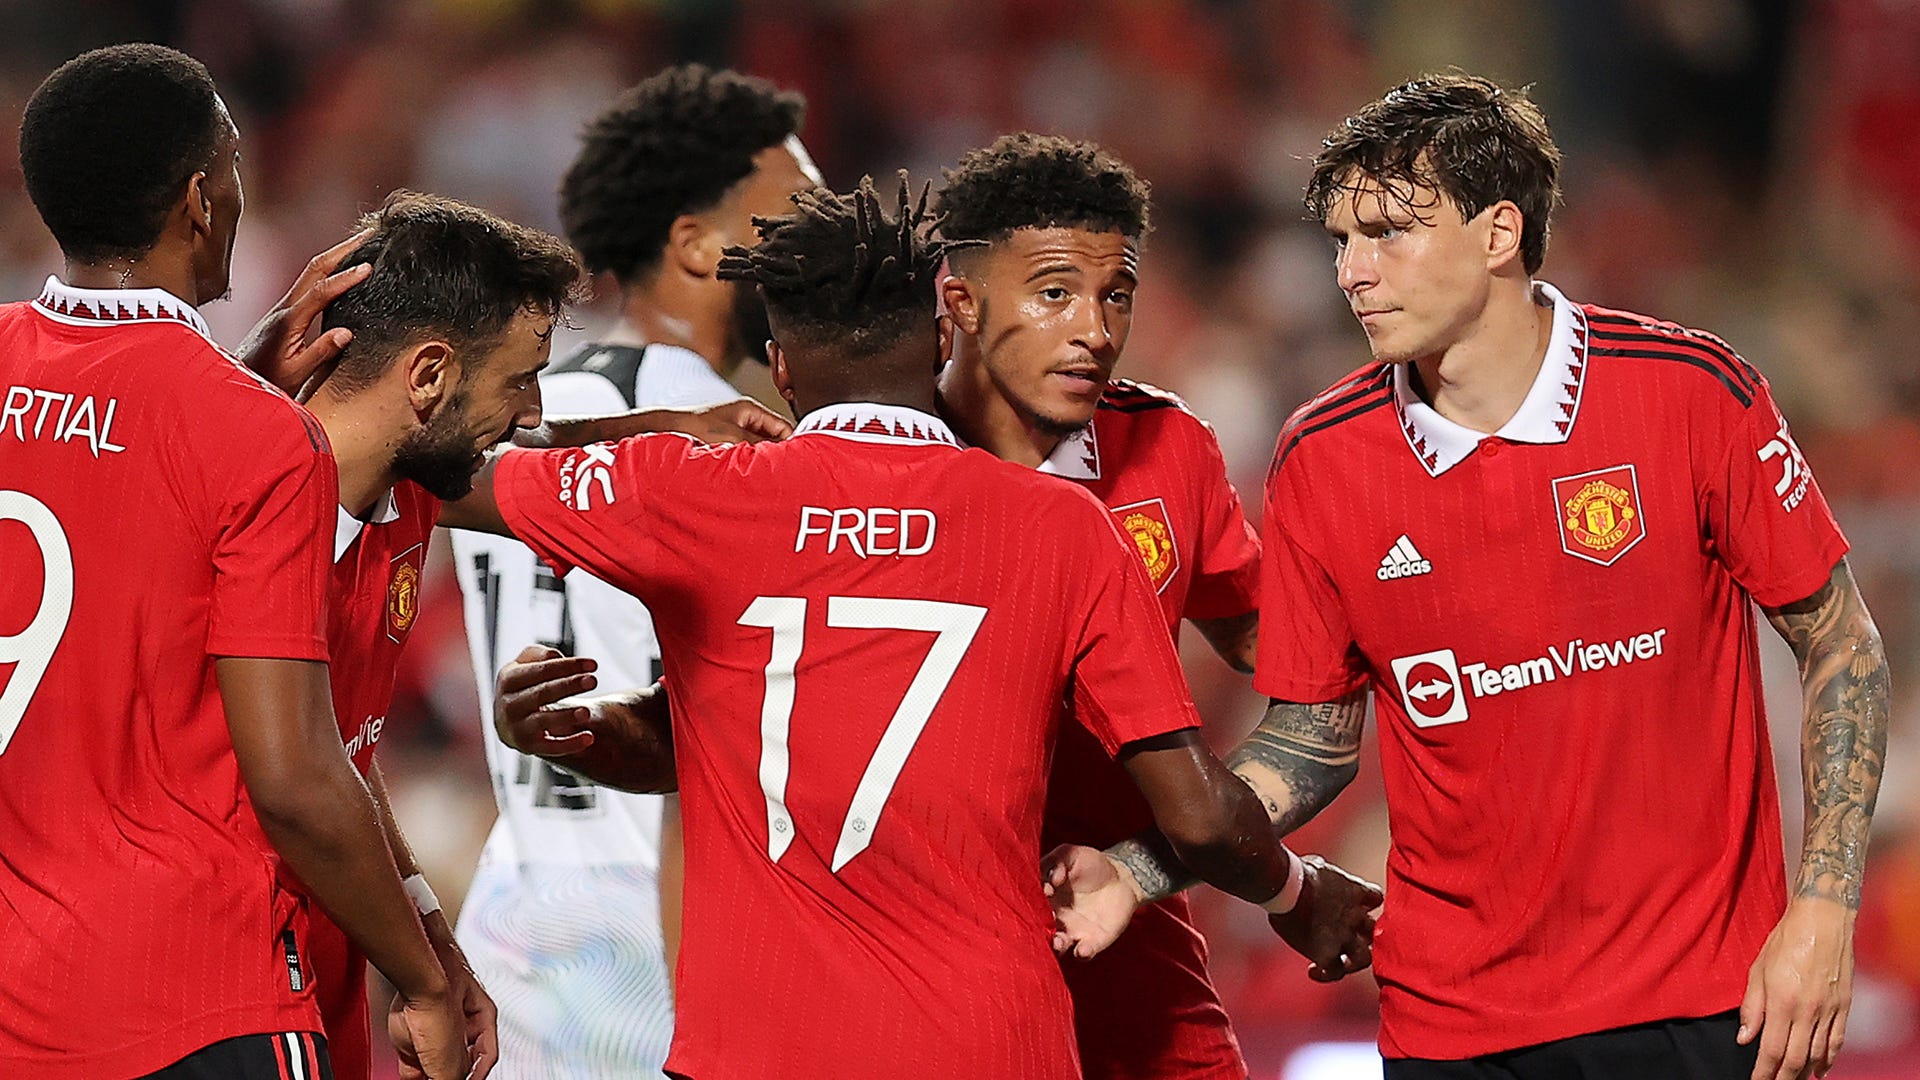           Manchester United has released list of best 20-man squad for the weekend vs Brighton